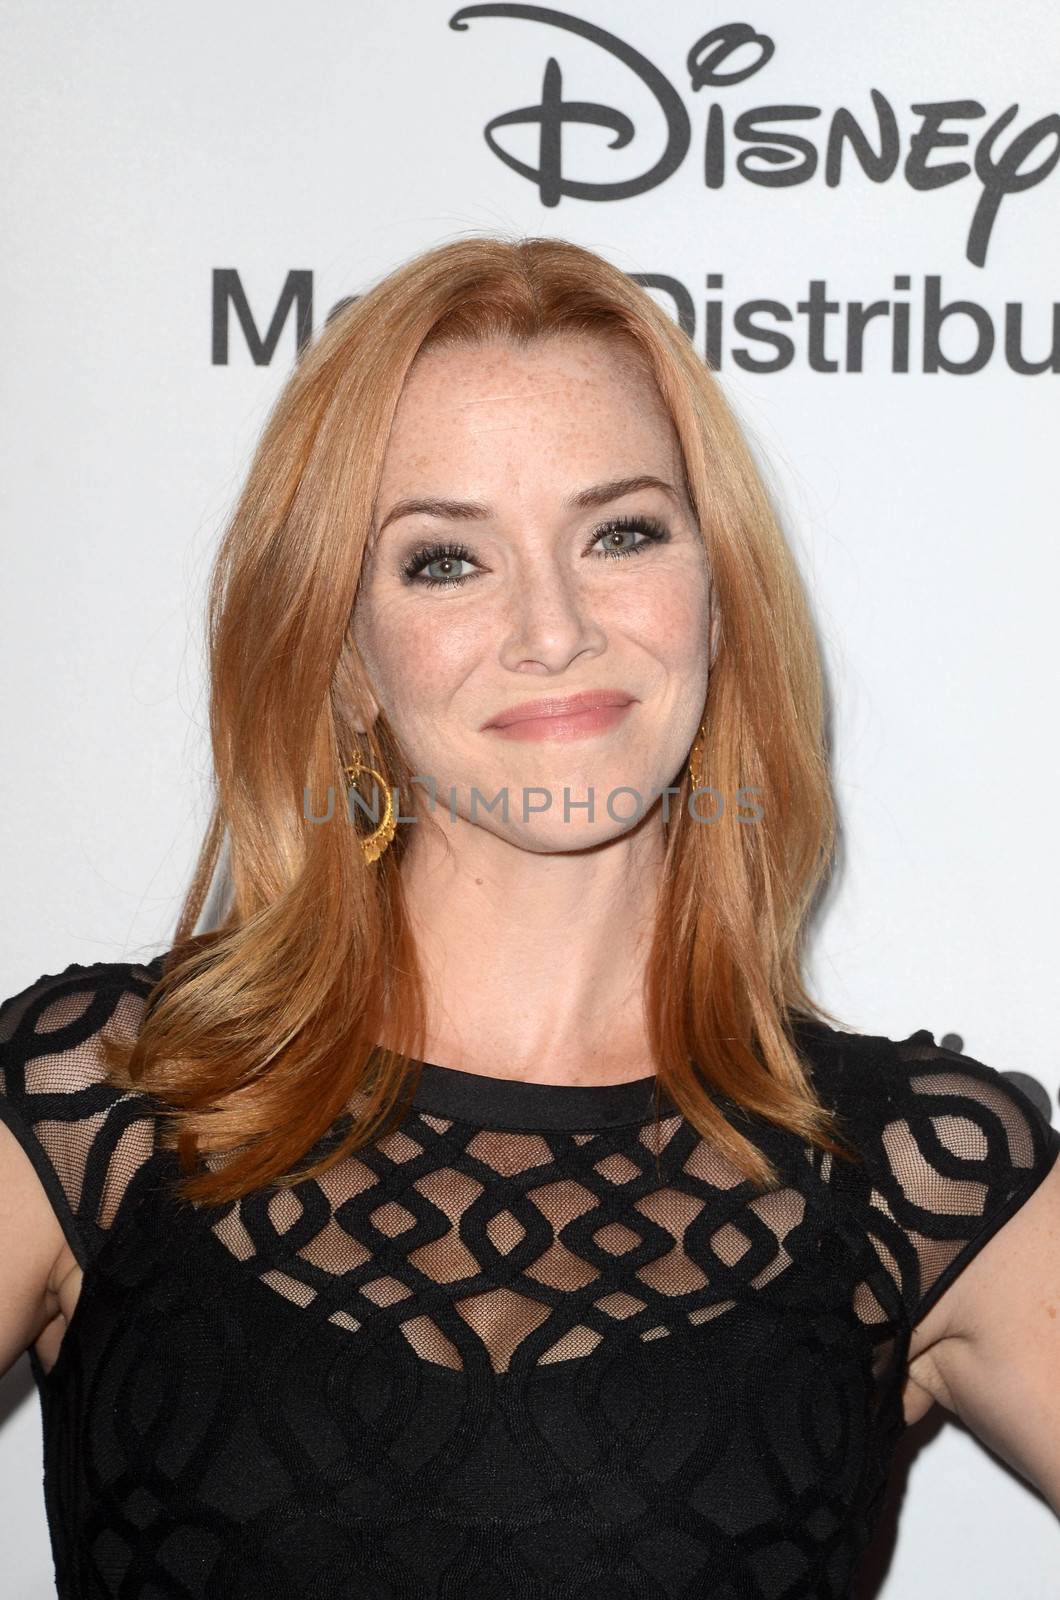 Annie Wersching
at the 2017 ABC International Upfronts, Disney Studios, Burbank, CA 05-21-17/ImageCollect by ImageCollect